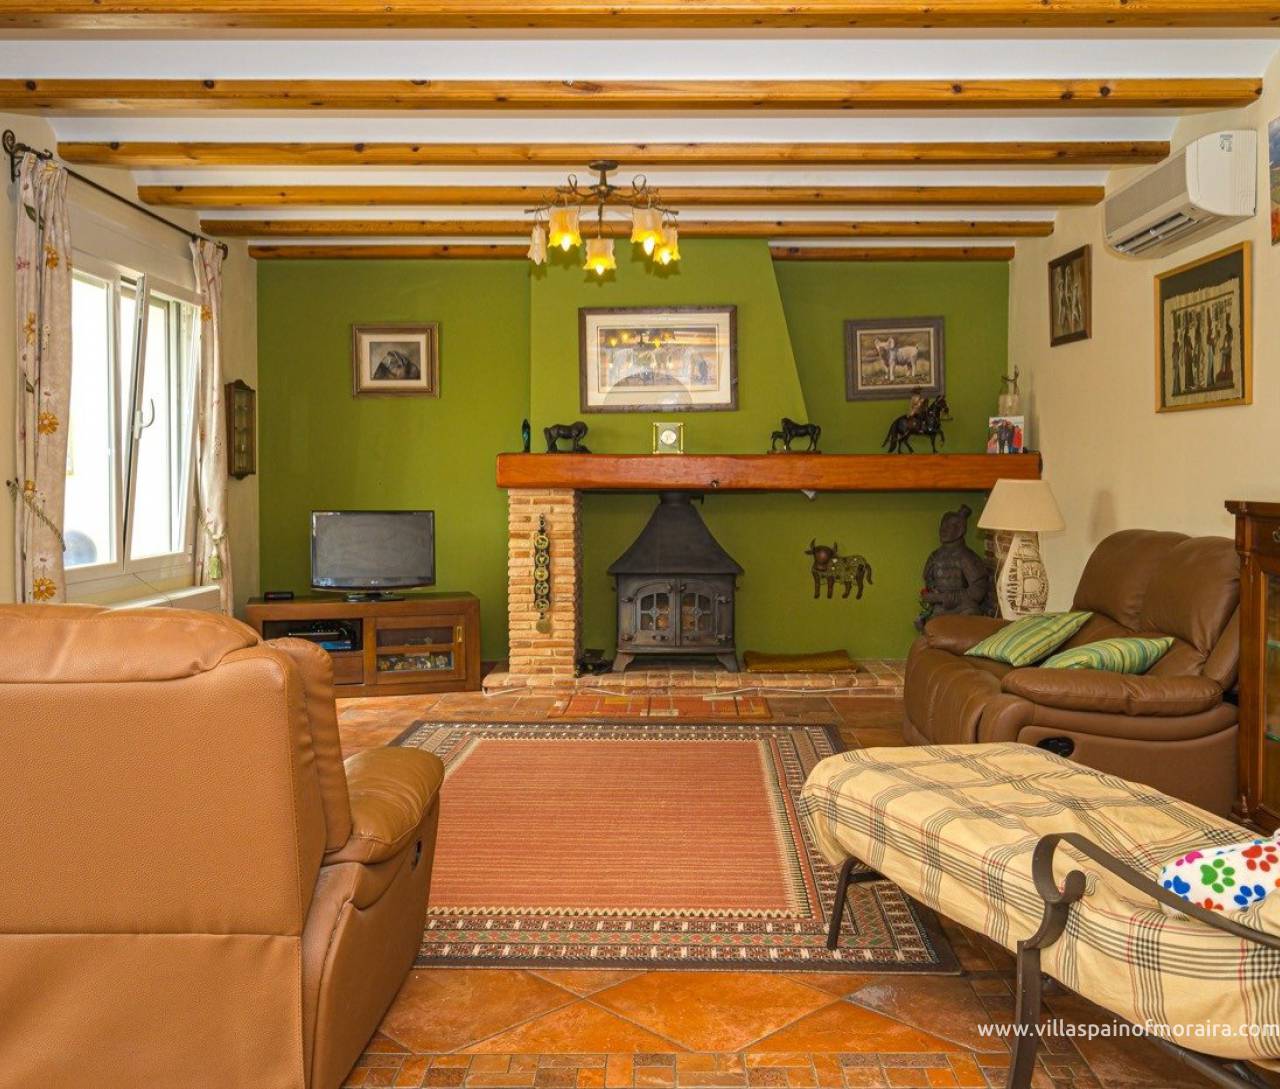 Sale - Finca / Country house - Jalon Valley